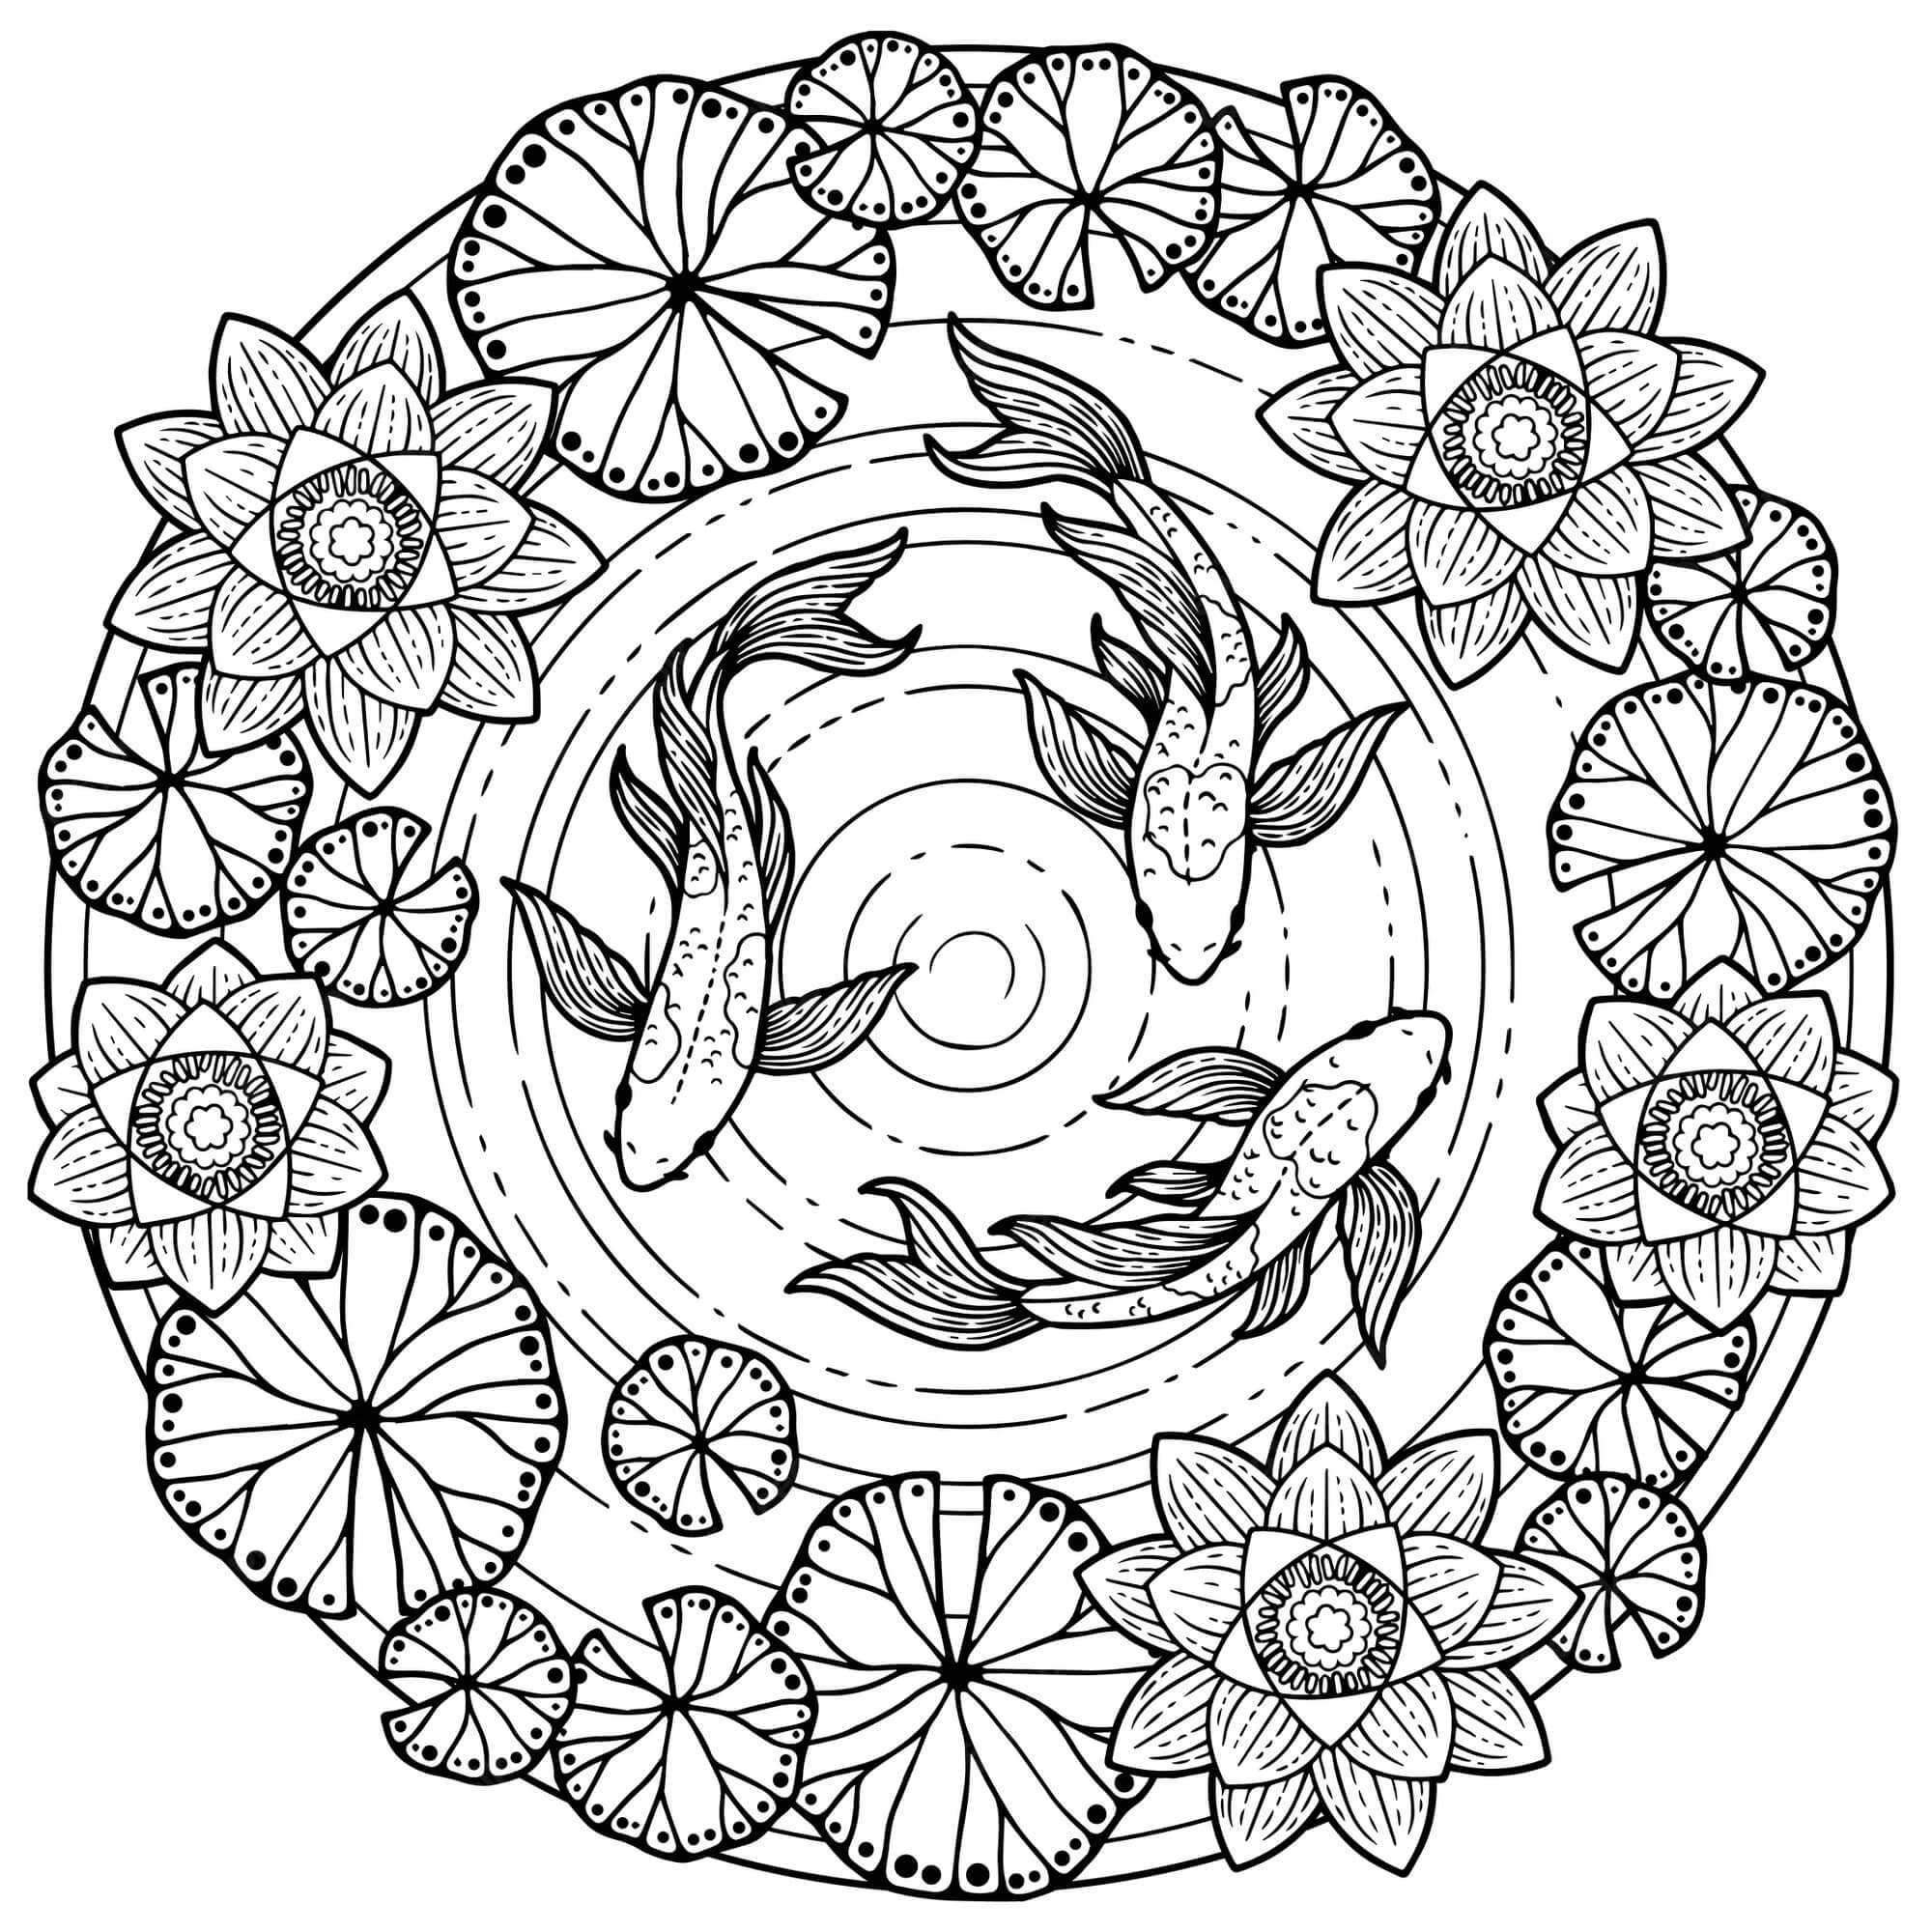 Mandala Flowers and Fishes in Summer Coloring Page Mandalas